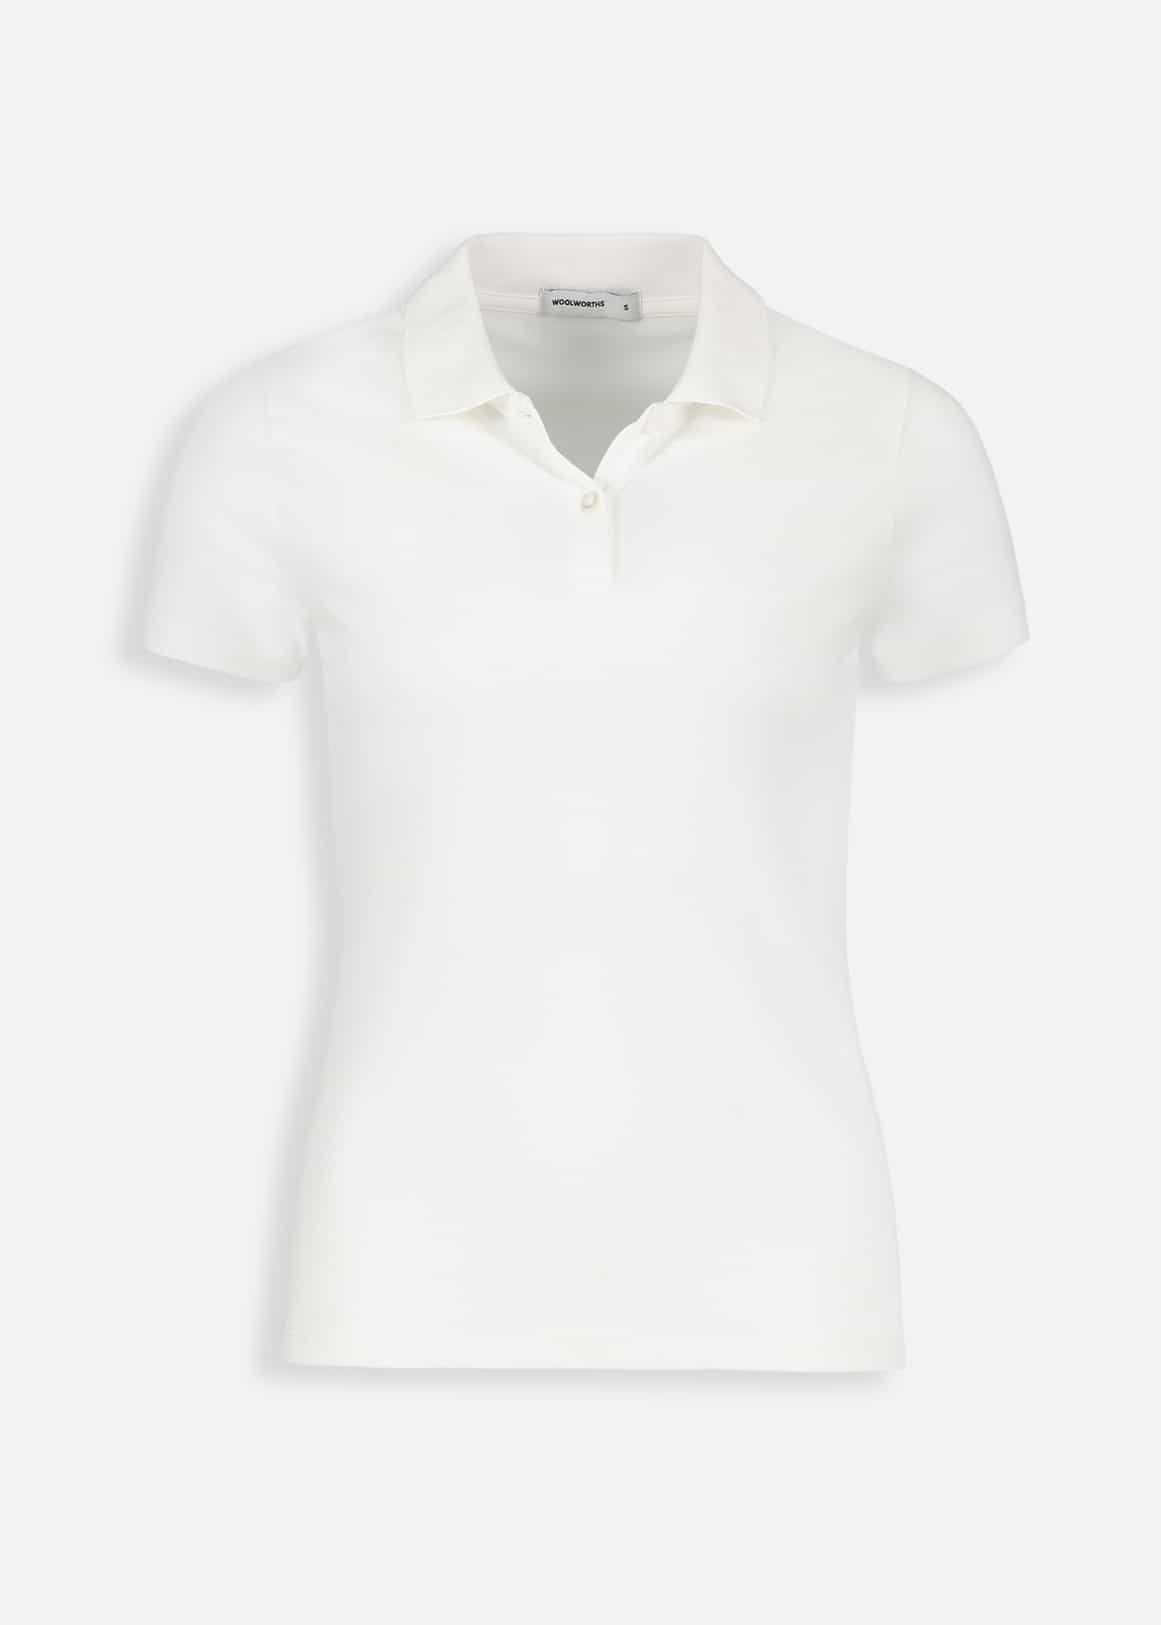 S22 POLO T SHIRT - Woolworths Mauritius Online